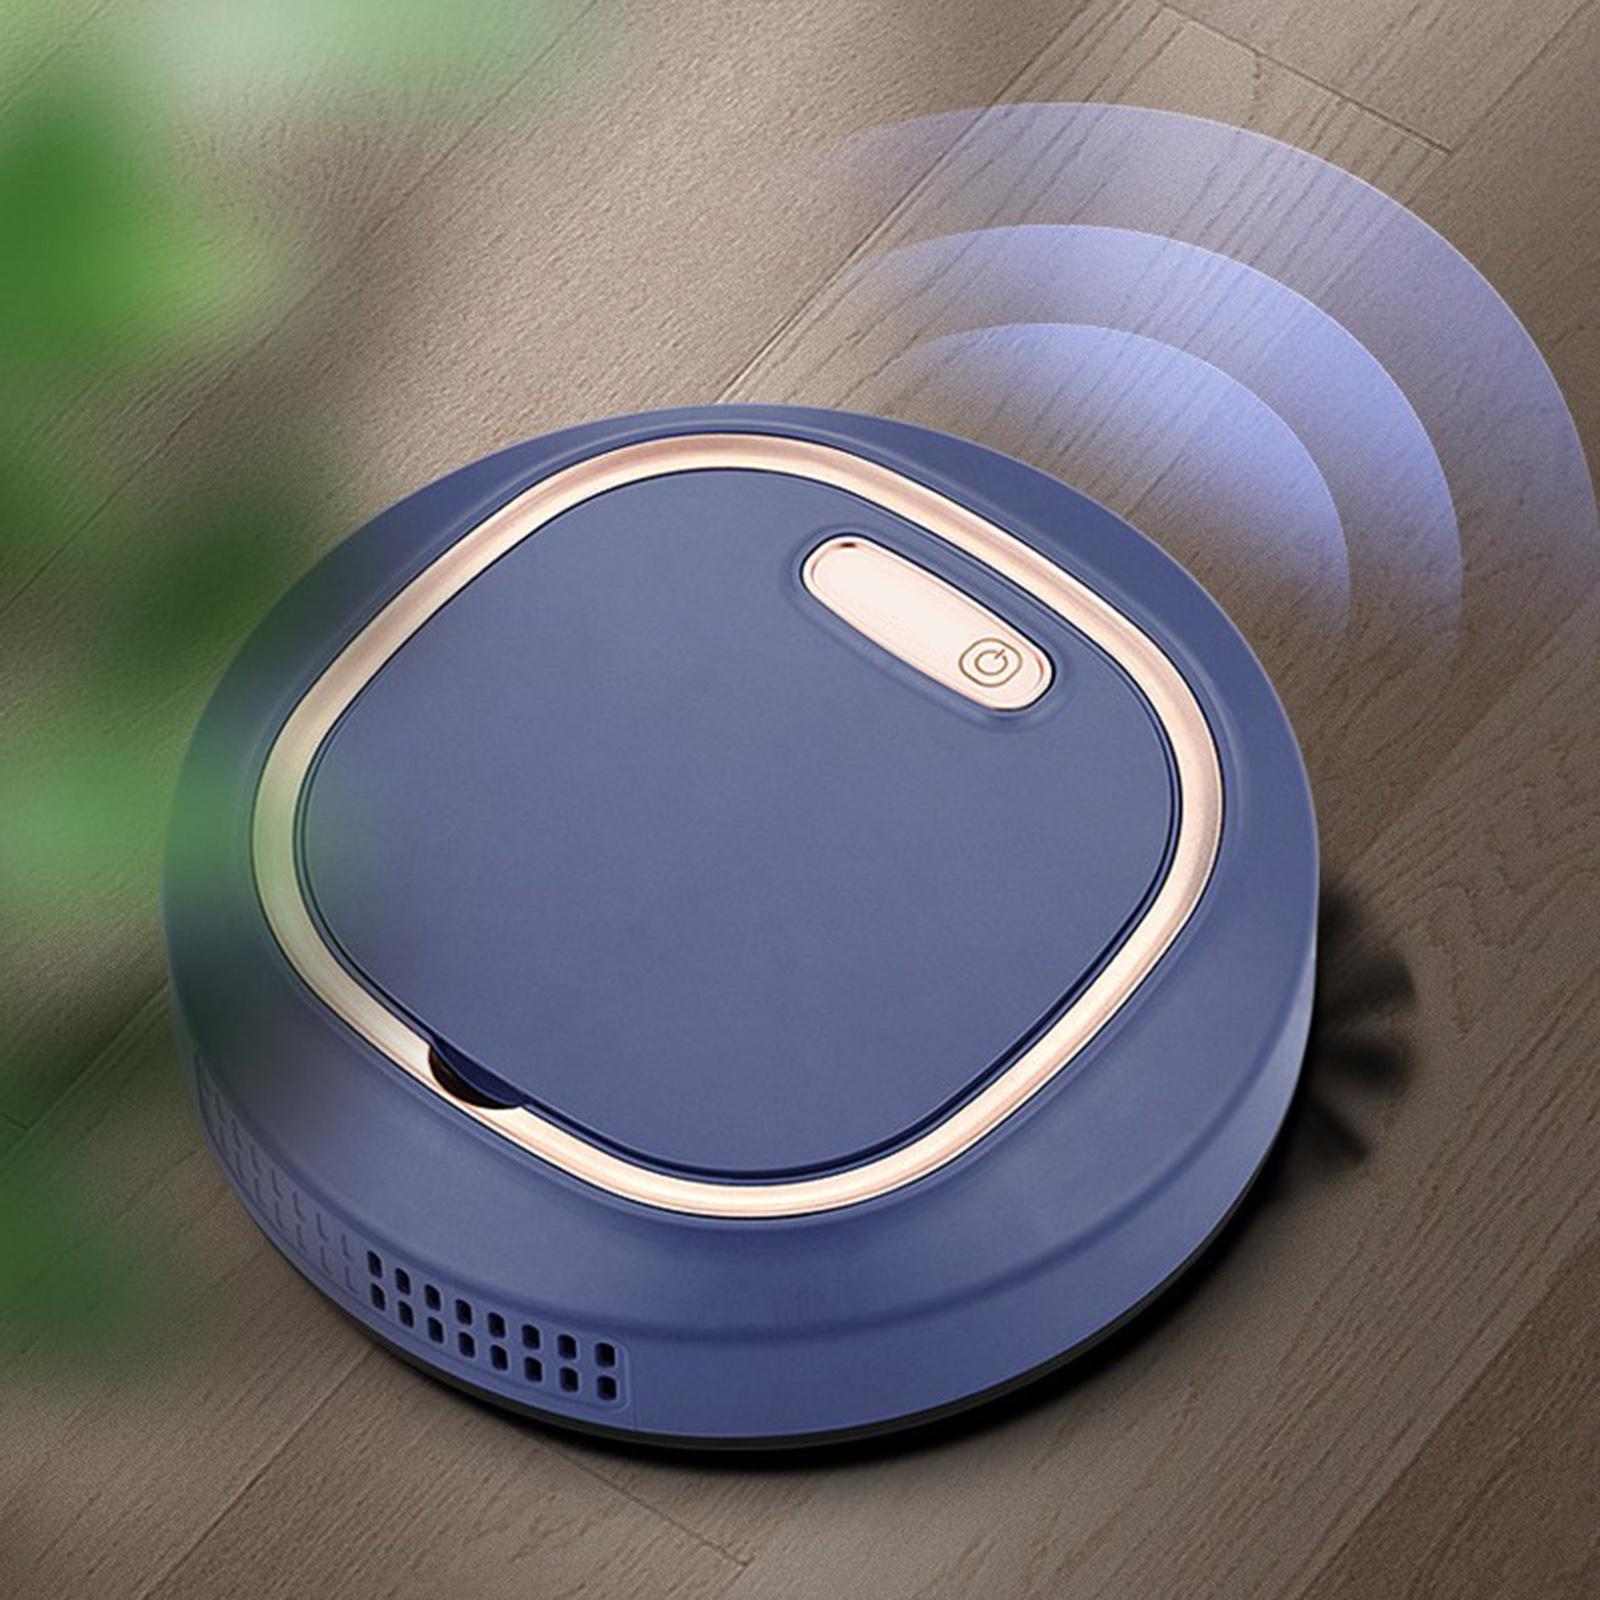 3 in 1 Robot Vacuum Cleaner, Strong Suction,Slim, Quiet, Great for Pet Hair Hard Floor and Low Pile Carpet